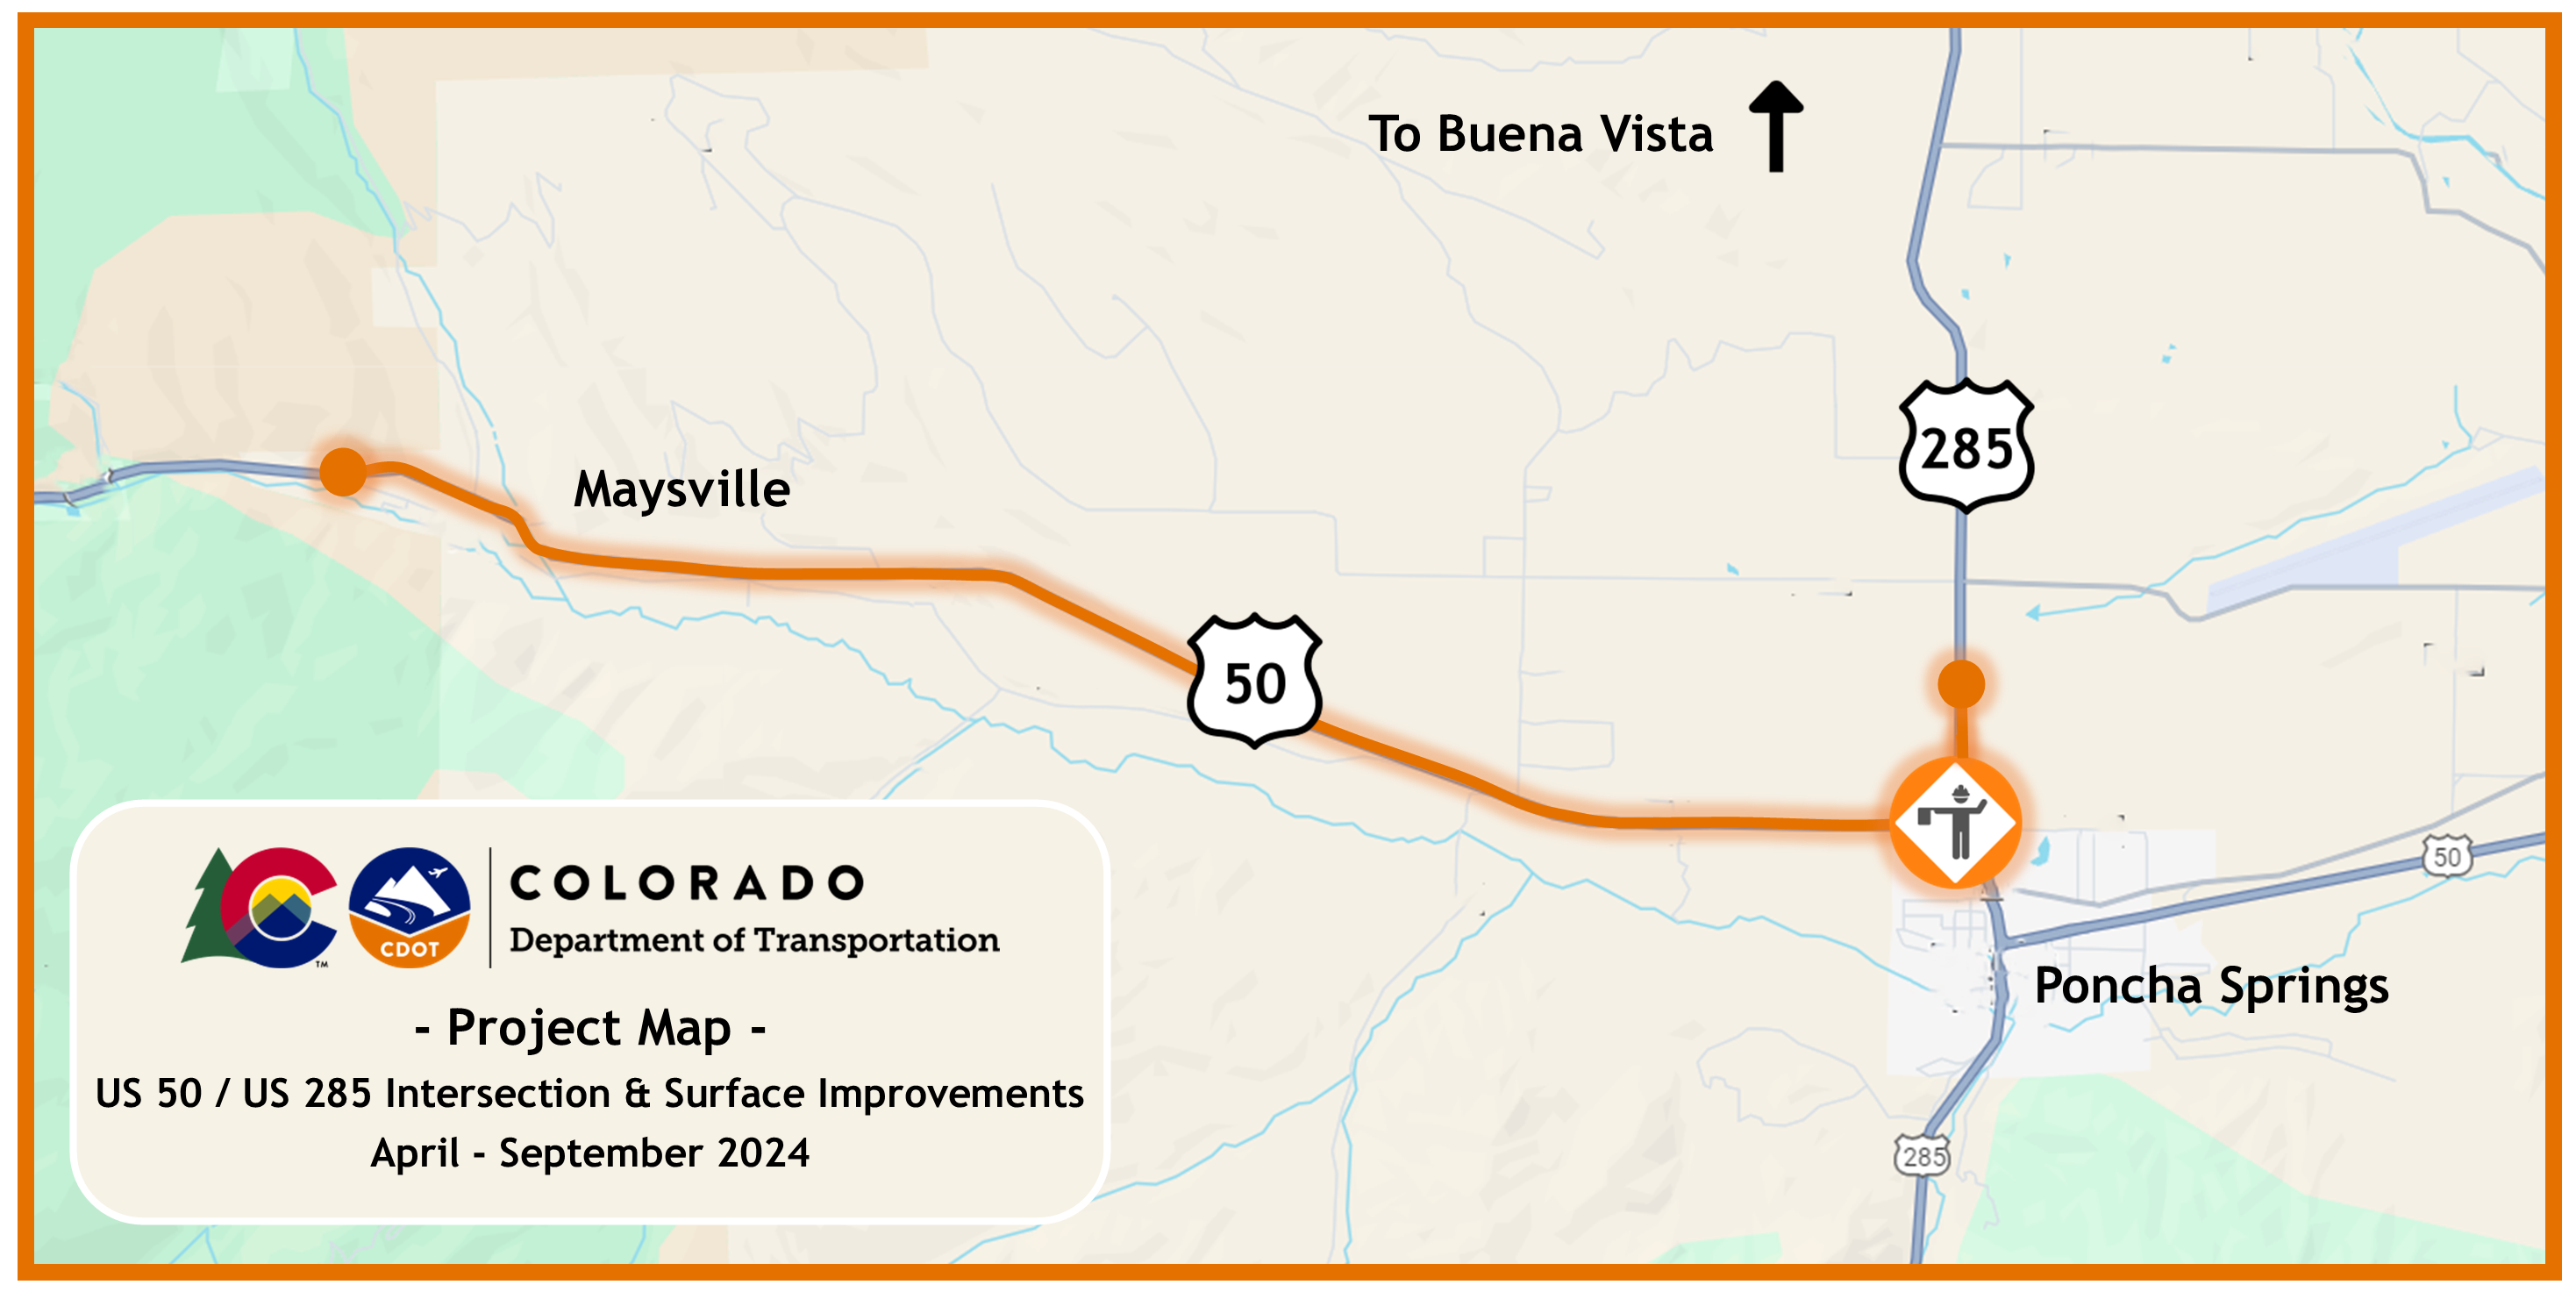 Project Map of US 285 and US 50 Intersection and Surface Improvements April through September 2024.png detail image